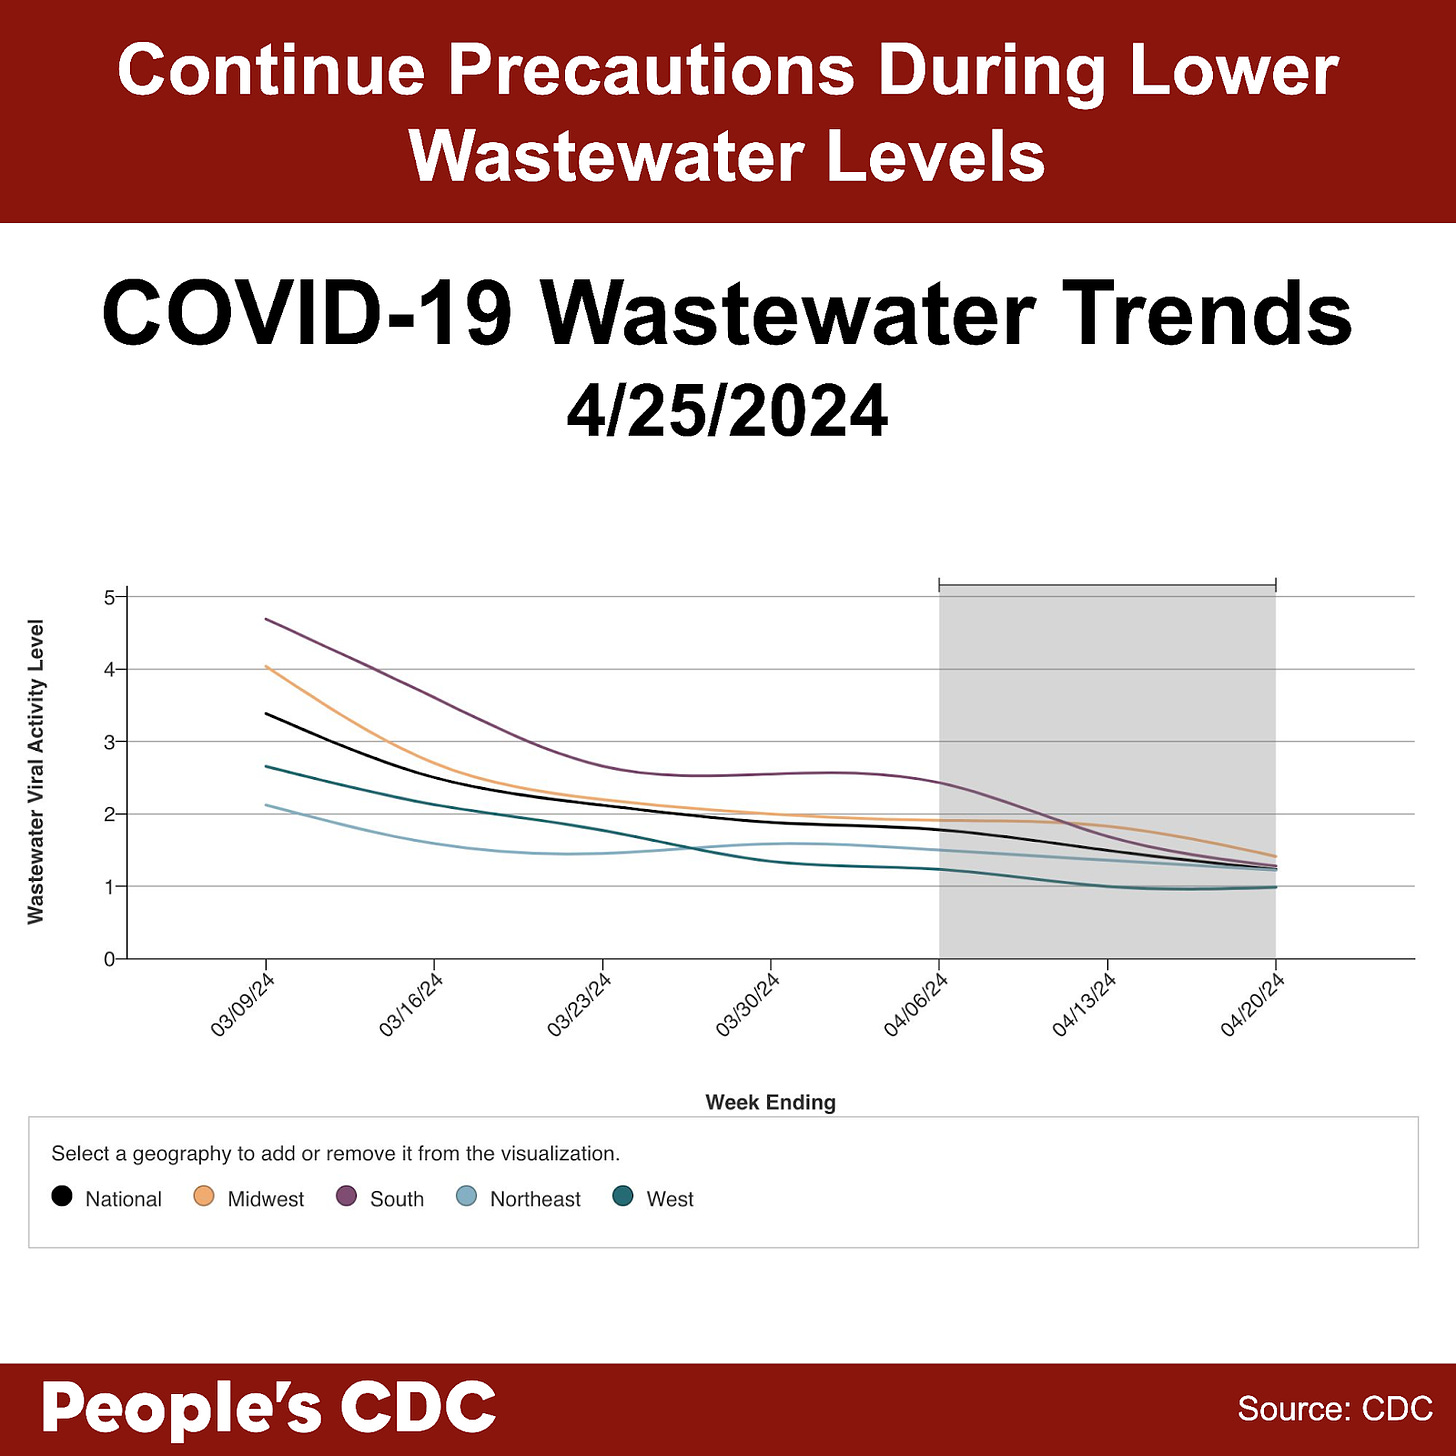 A line graph with the title, “COVID-19 Wastewater Trends 4/25/2024” with “Wastewater Viral Activity Level” indicated on the left-hand vertical axis, going from 0-5, and “Week Ending” across the horizontal axis, with date labels ranging from 3/9/24 to 4/06/24, with the graph extending through 4/20/24. A key at the bottom indicates line colors. National is black, Midwest is orange, South is purple, Northeast is light blue, and West is green. Overall, levels have trended downward since last month. Within the gray-shaded provisional data provided for the last 2 weeks, all geographical regions are trending downward. Text above the graph reads “Continue Precautions During Lower Wastewater Levels. Text below: People’s CDC. Source: CDC.”